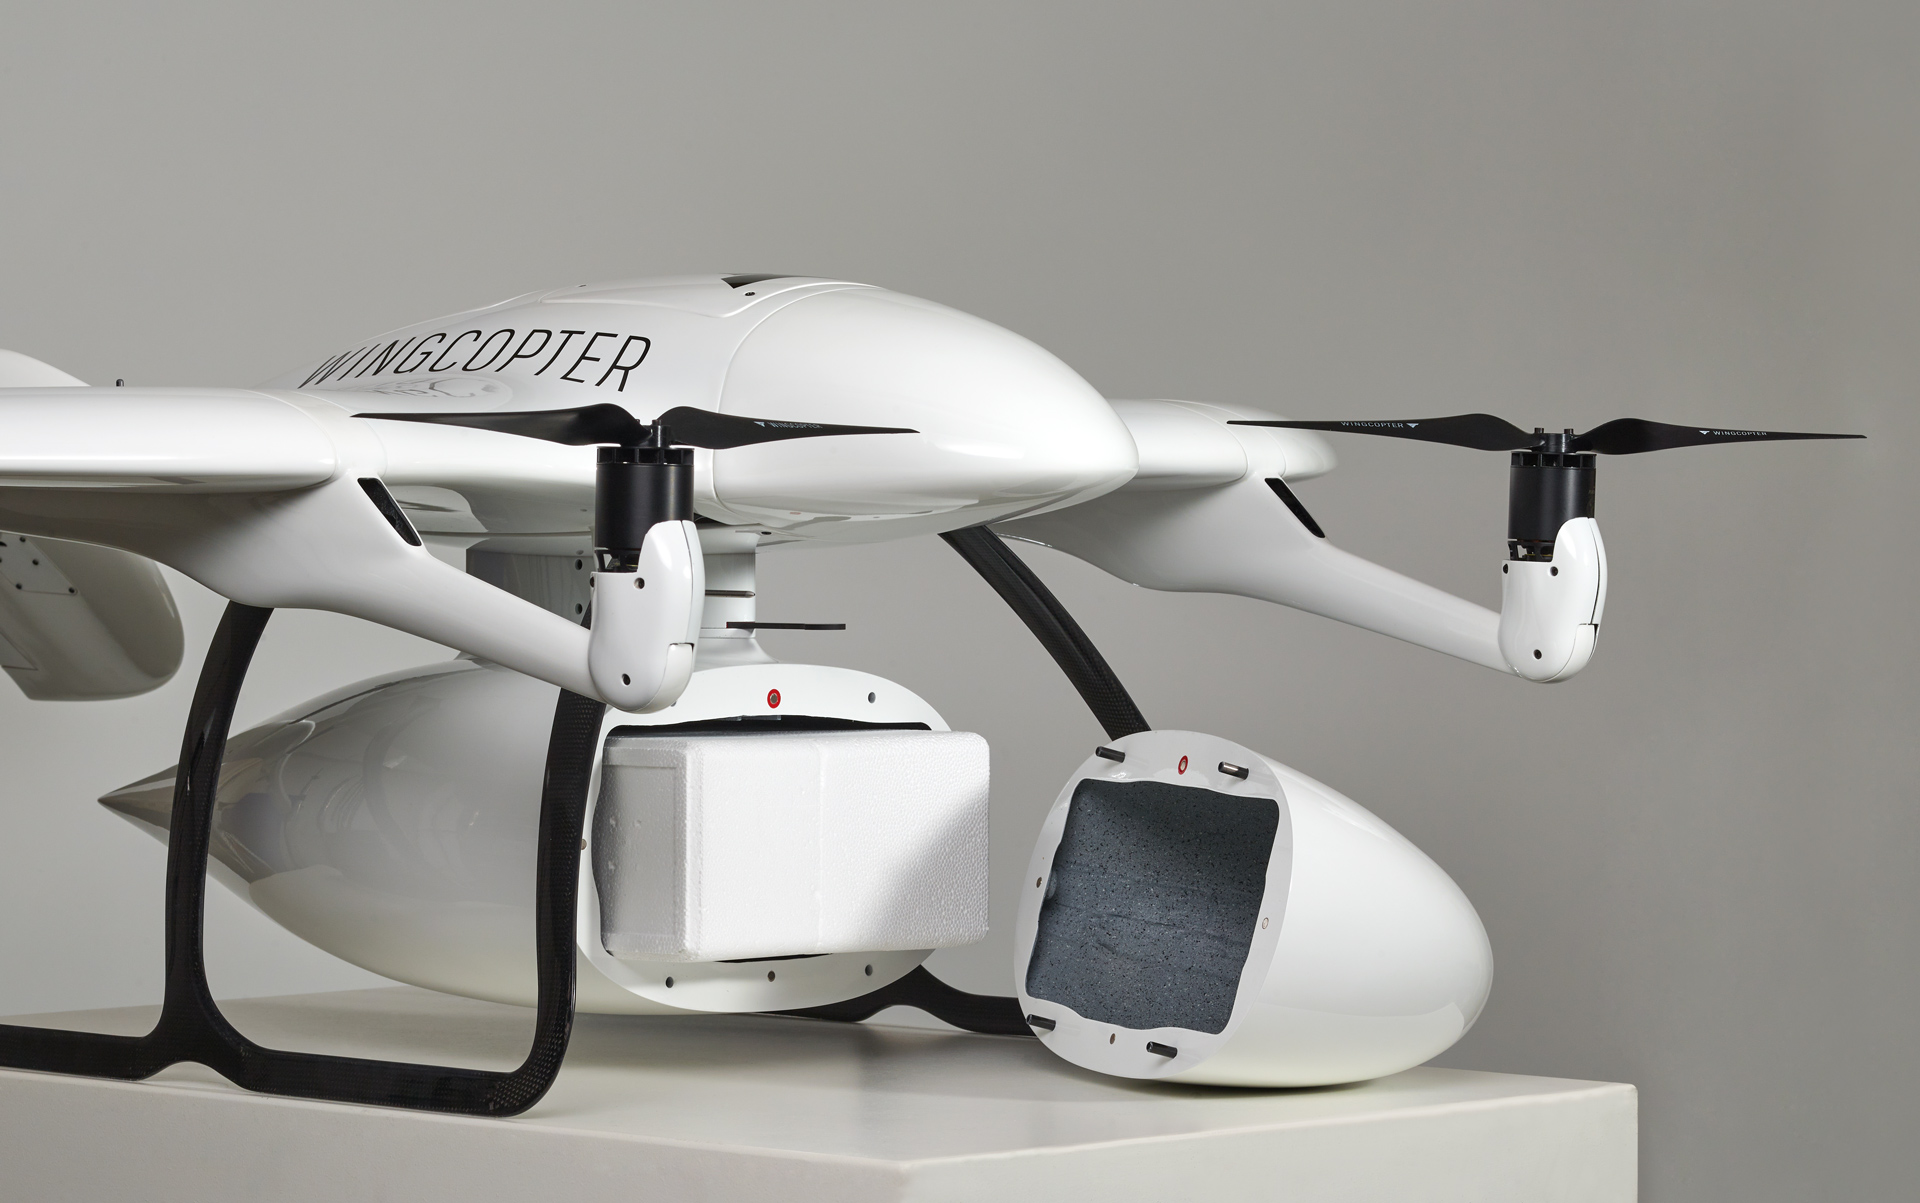 Wingcopter joins Flying Labs Network to support drone delivery projects